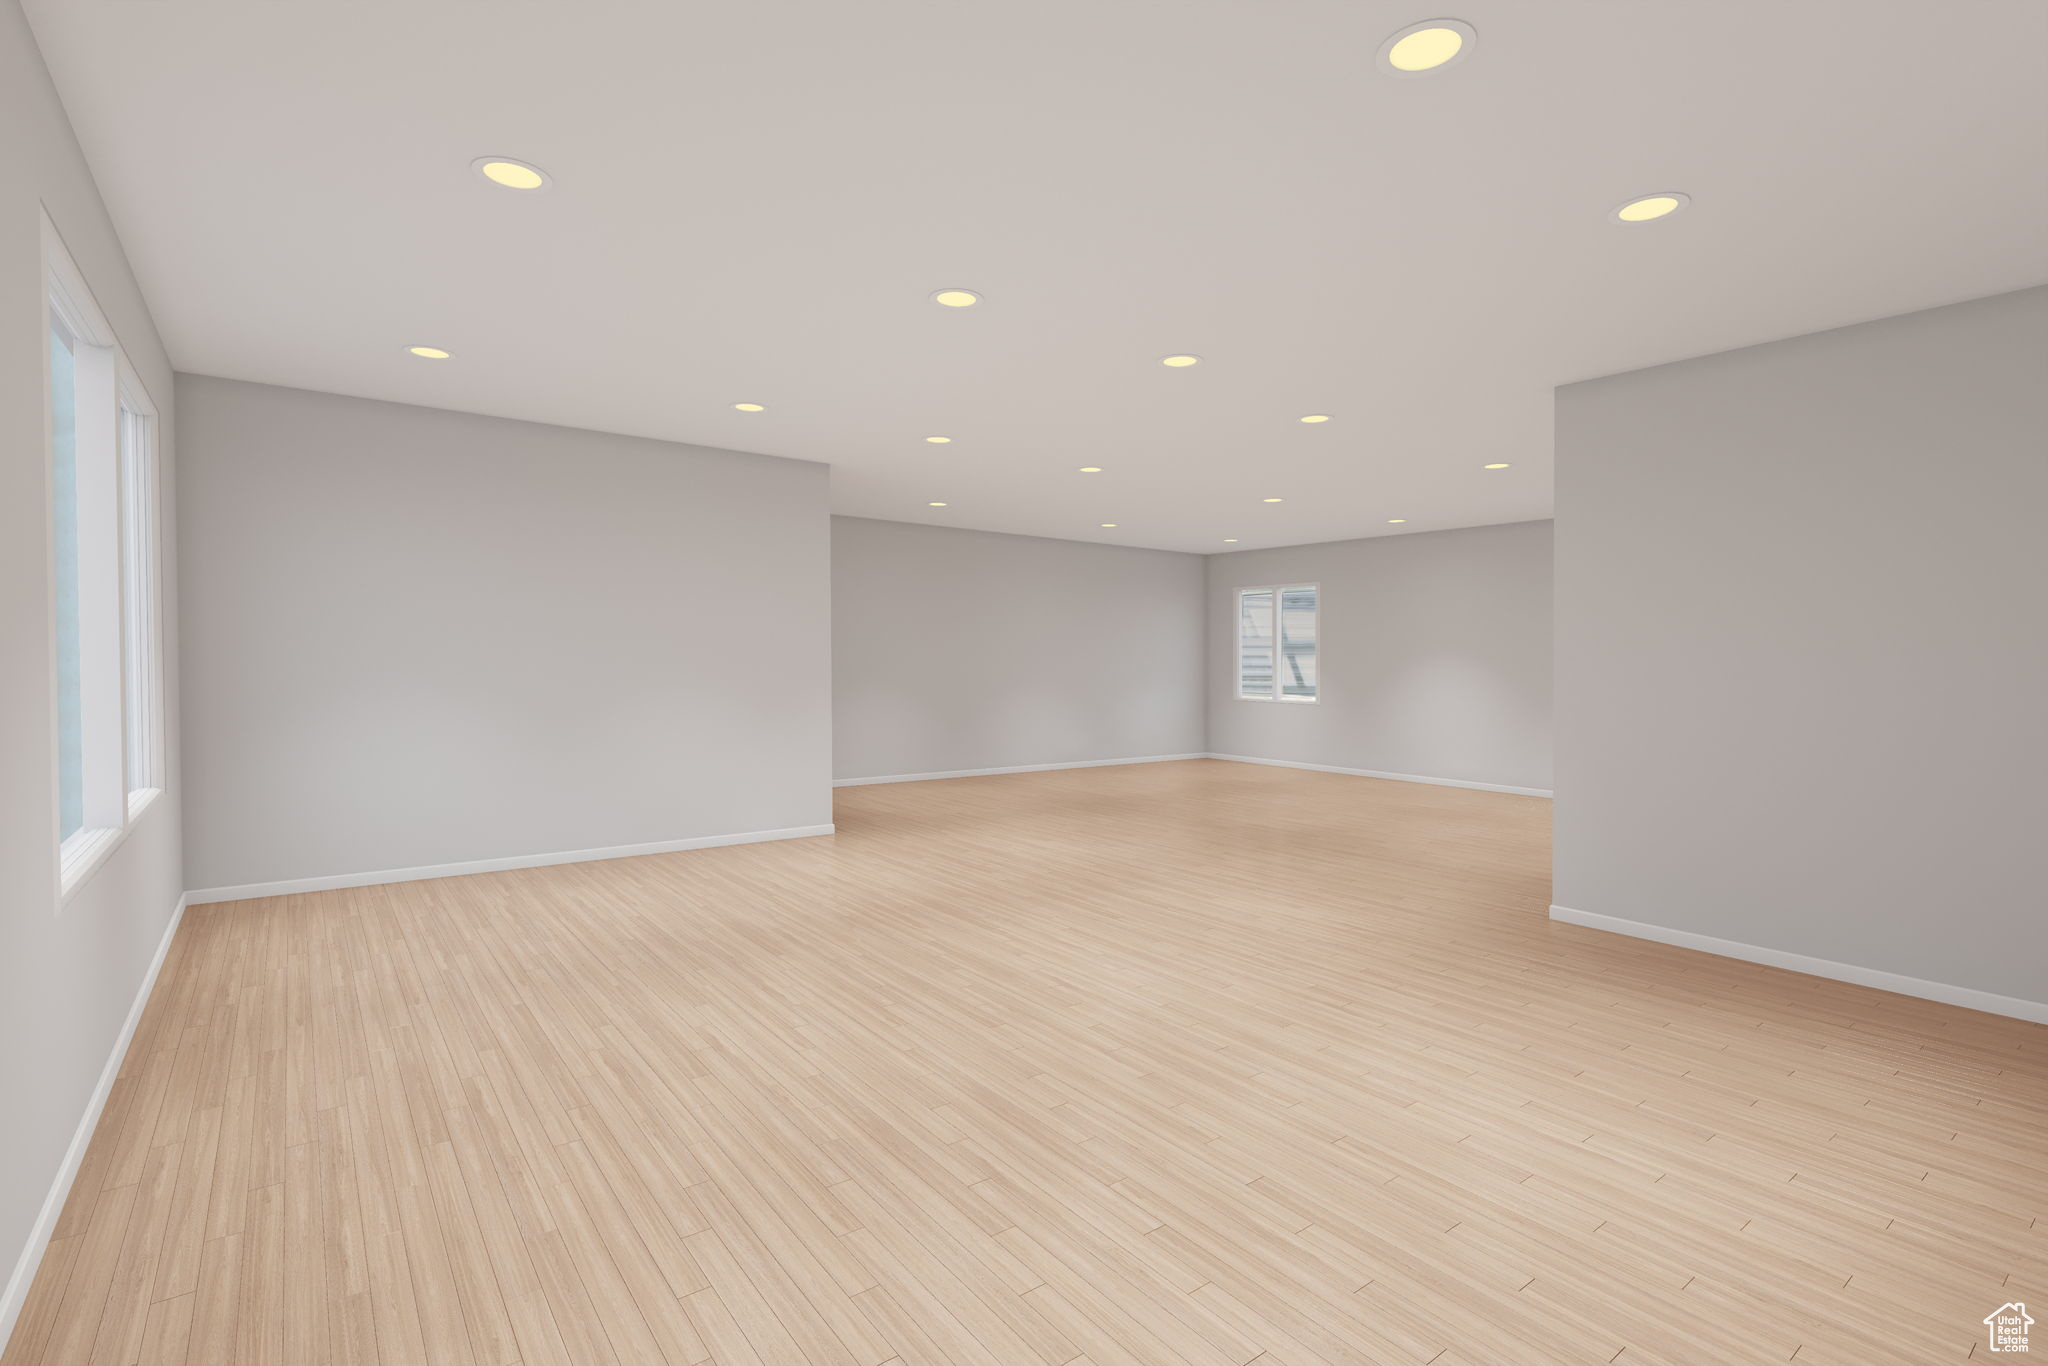 VIRTUALLY STAGED TO SHOW POTENTIAL unfurnished basement room featuring light hardwood / wood-style floors